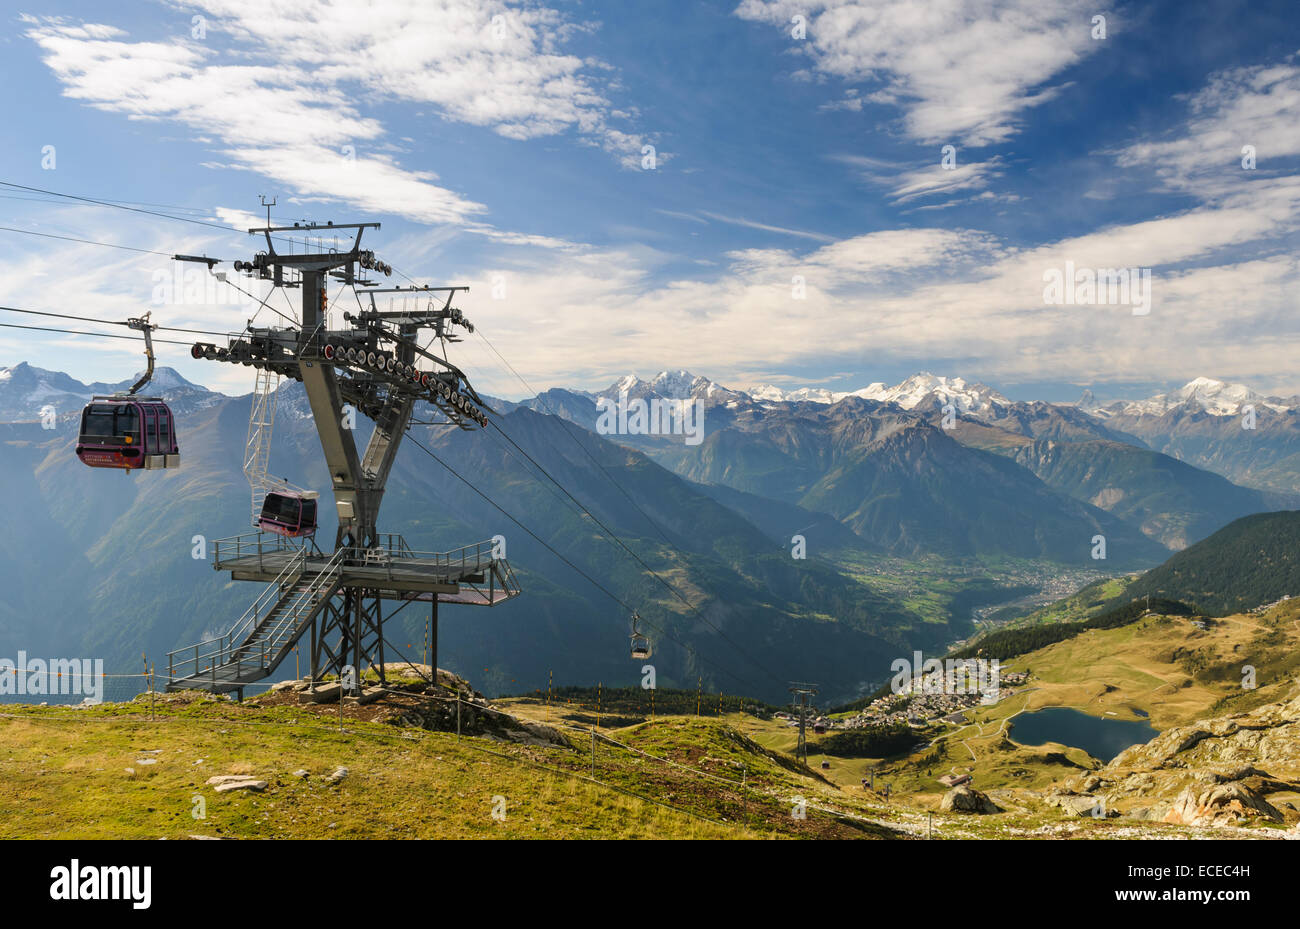 Switzerland, Valais, Betten, Bettmergrat, Overhead cable car passing by tower in mountains Stock Photo